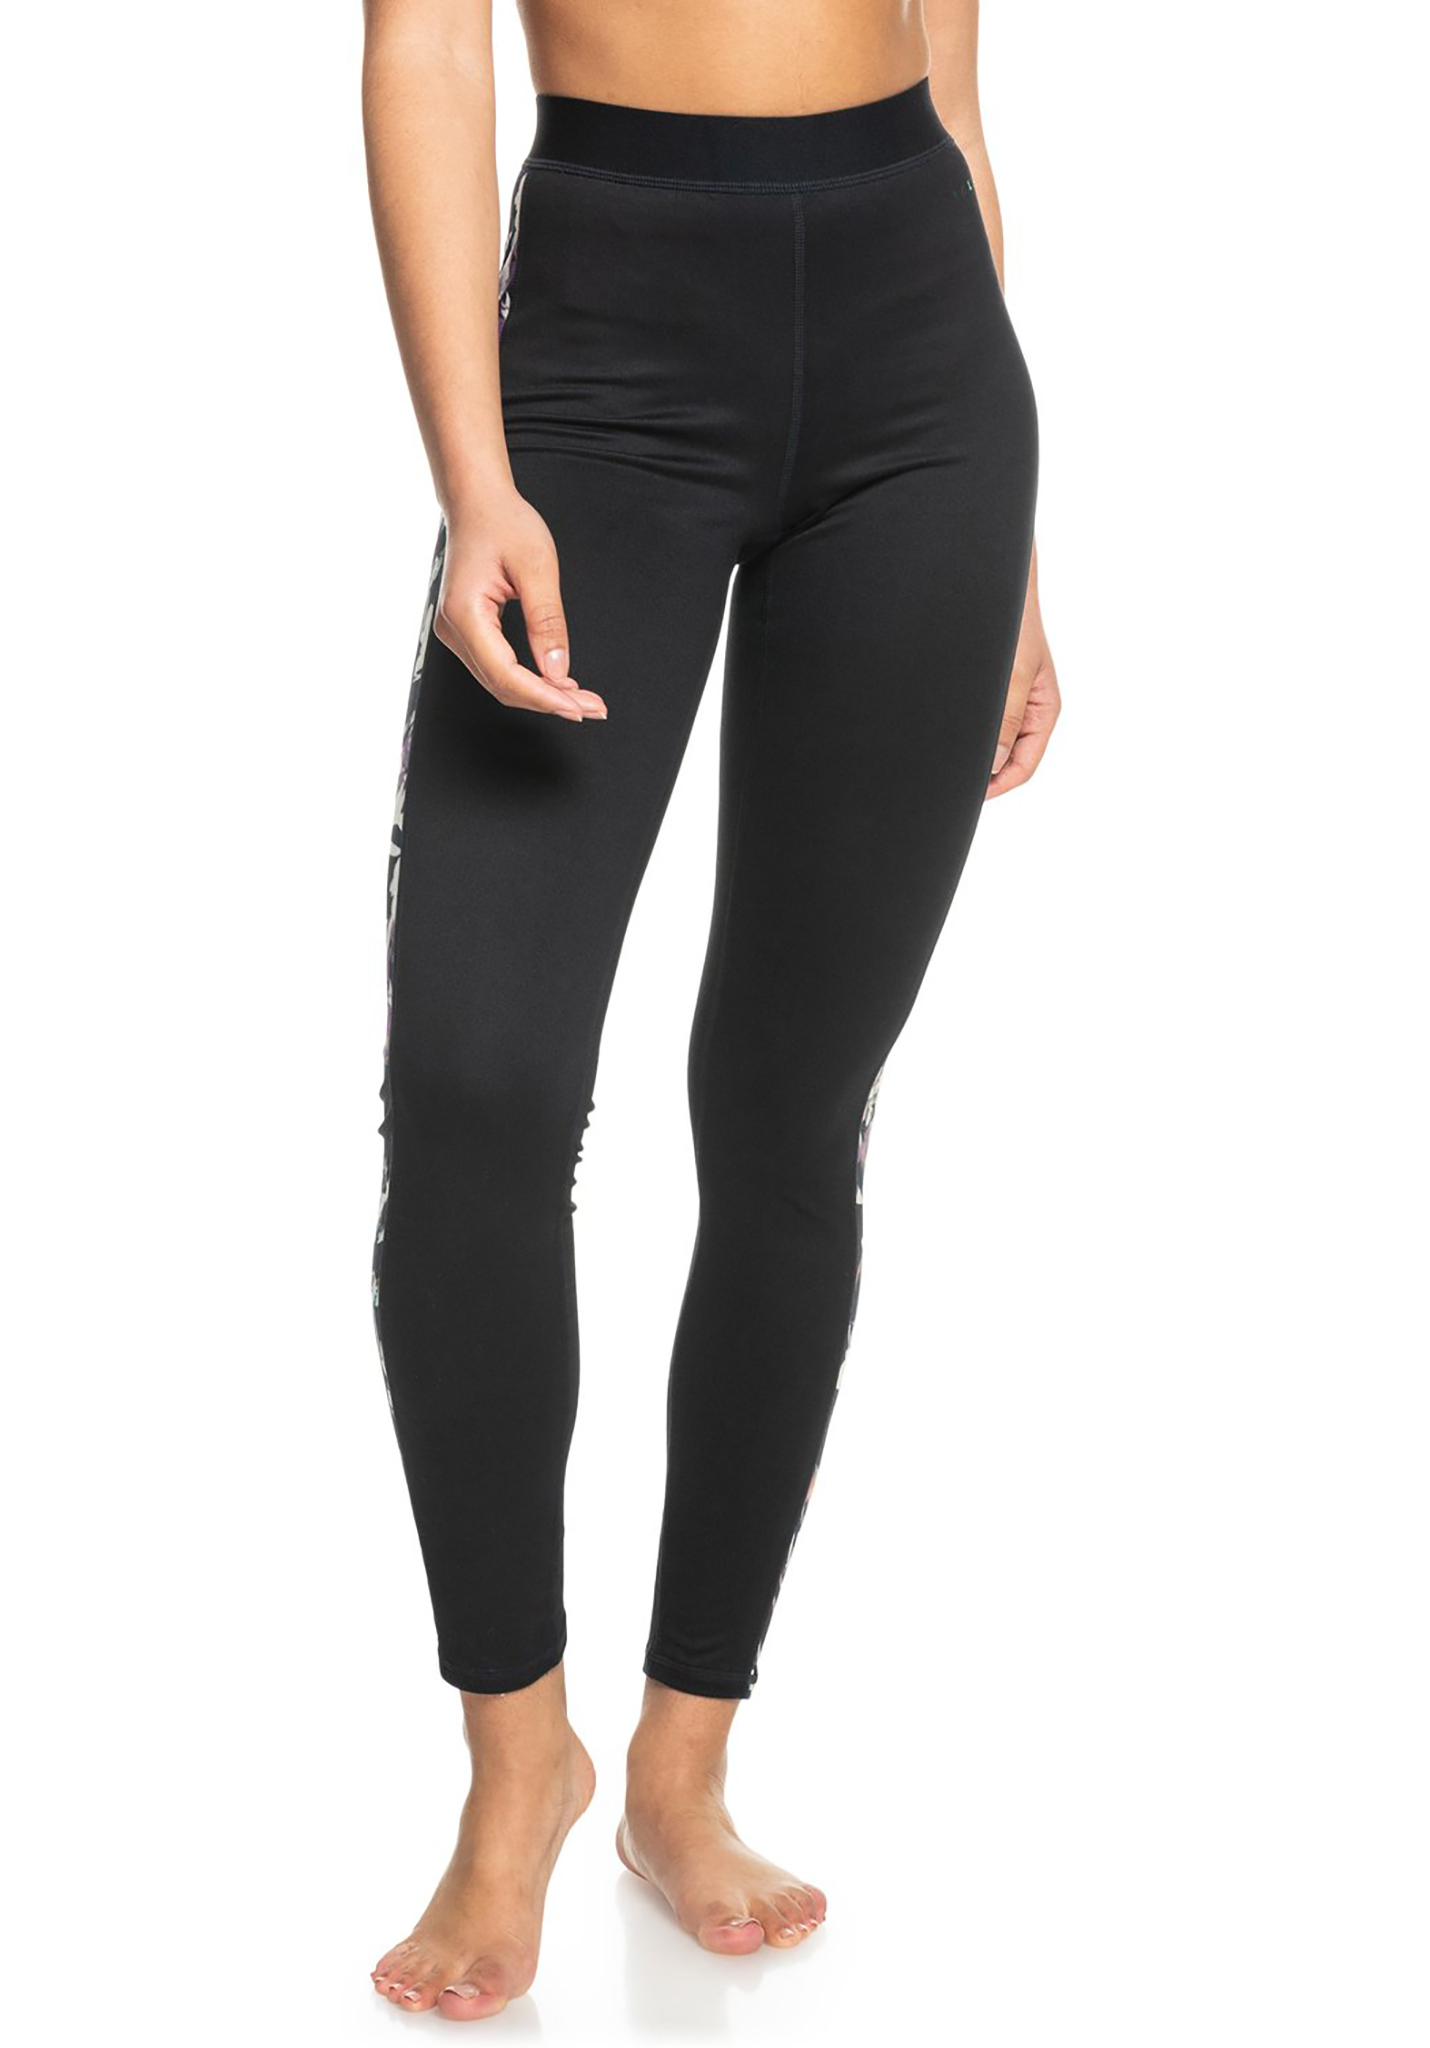 Roxy Frosted S - Technical Leggings anthracite M